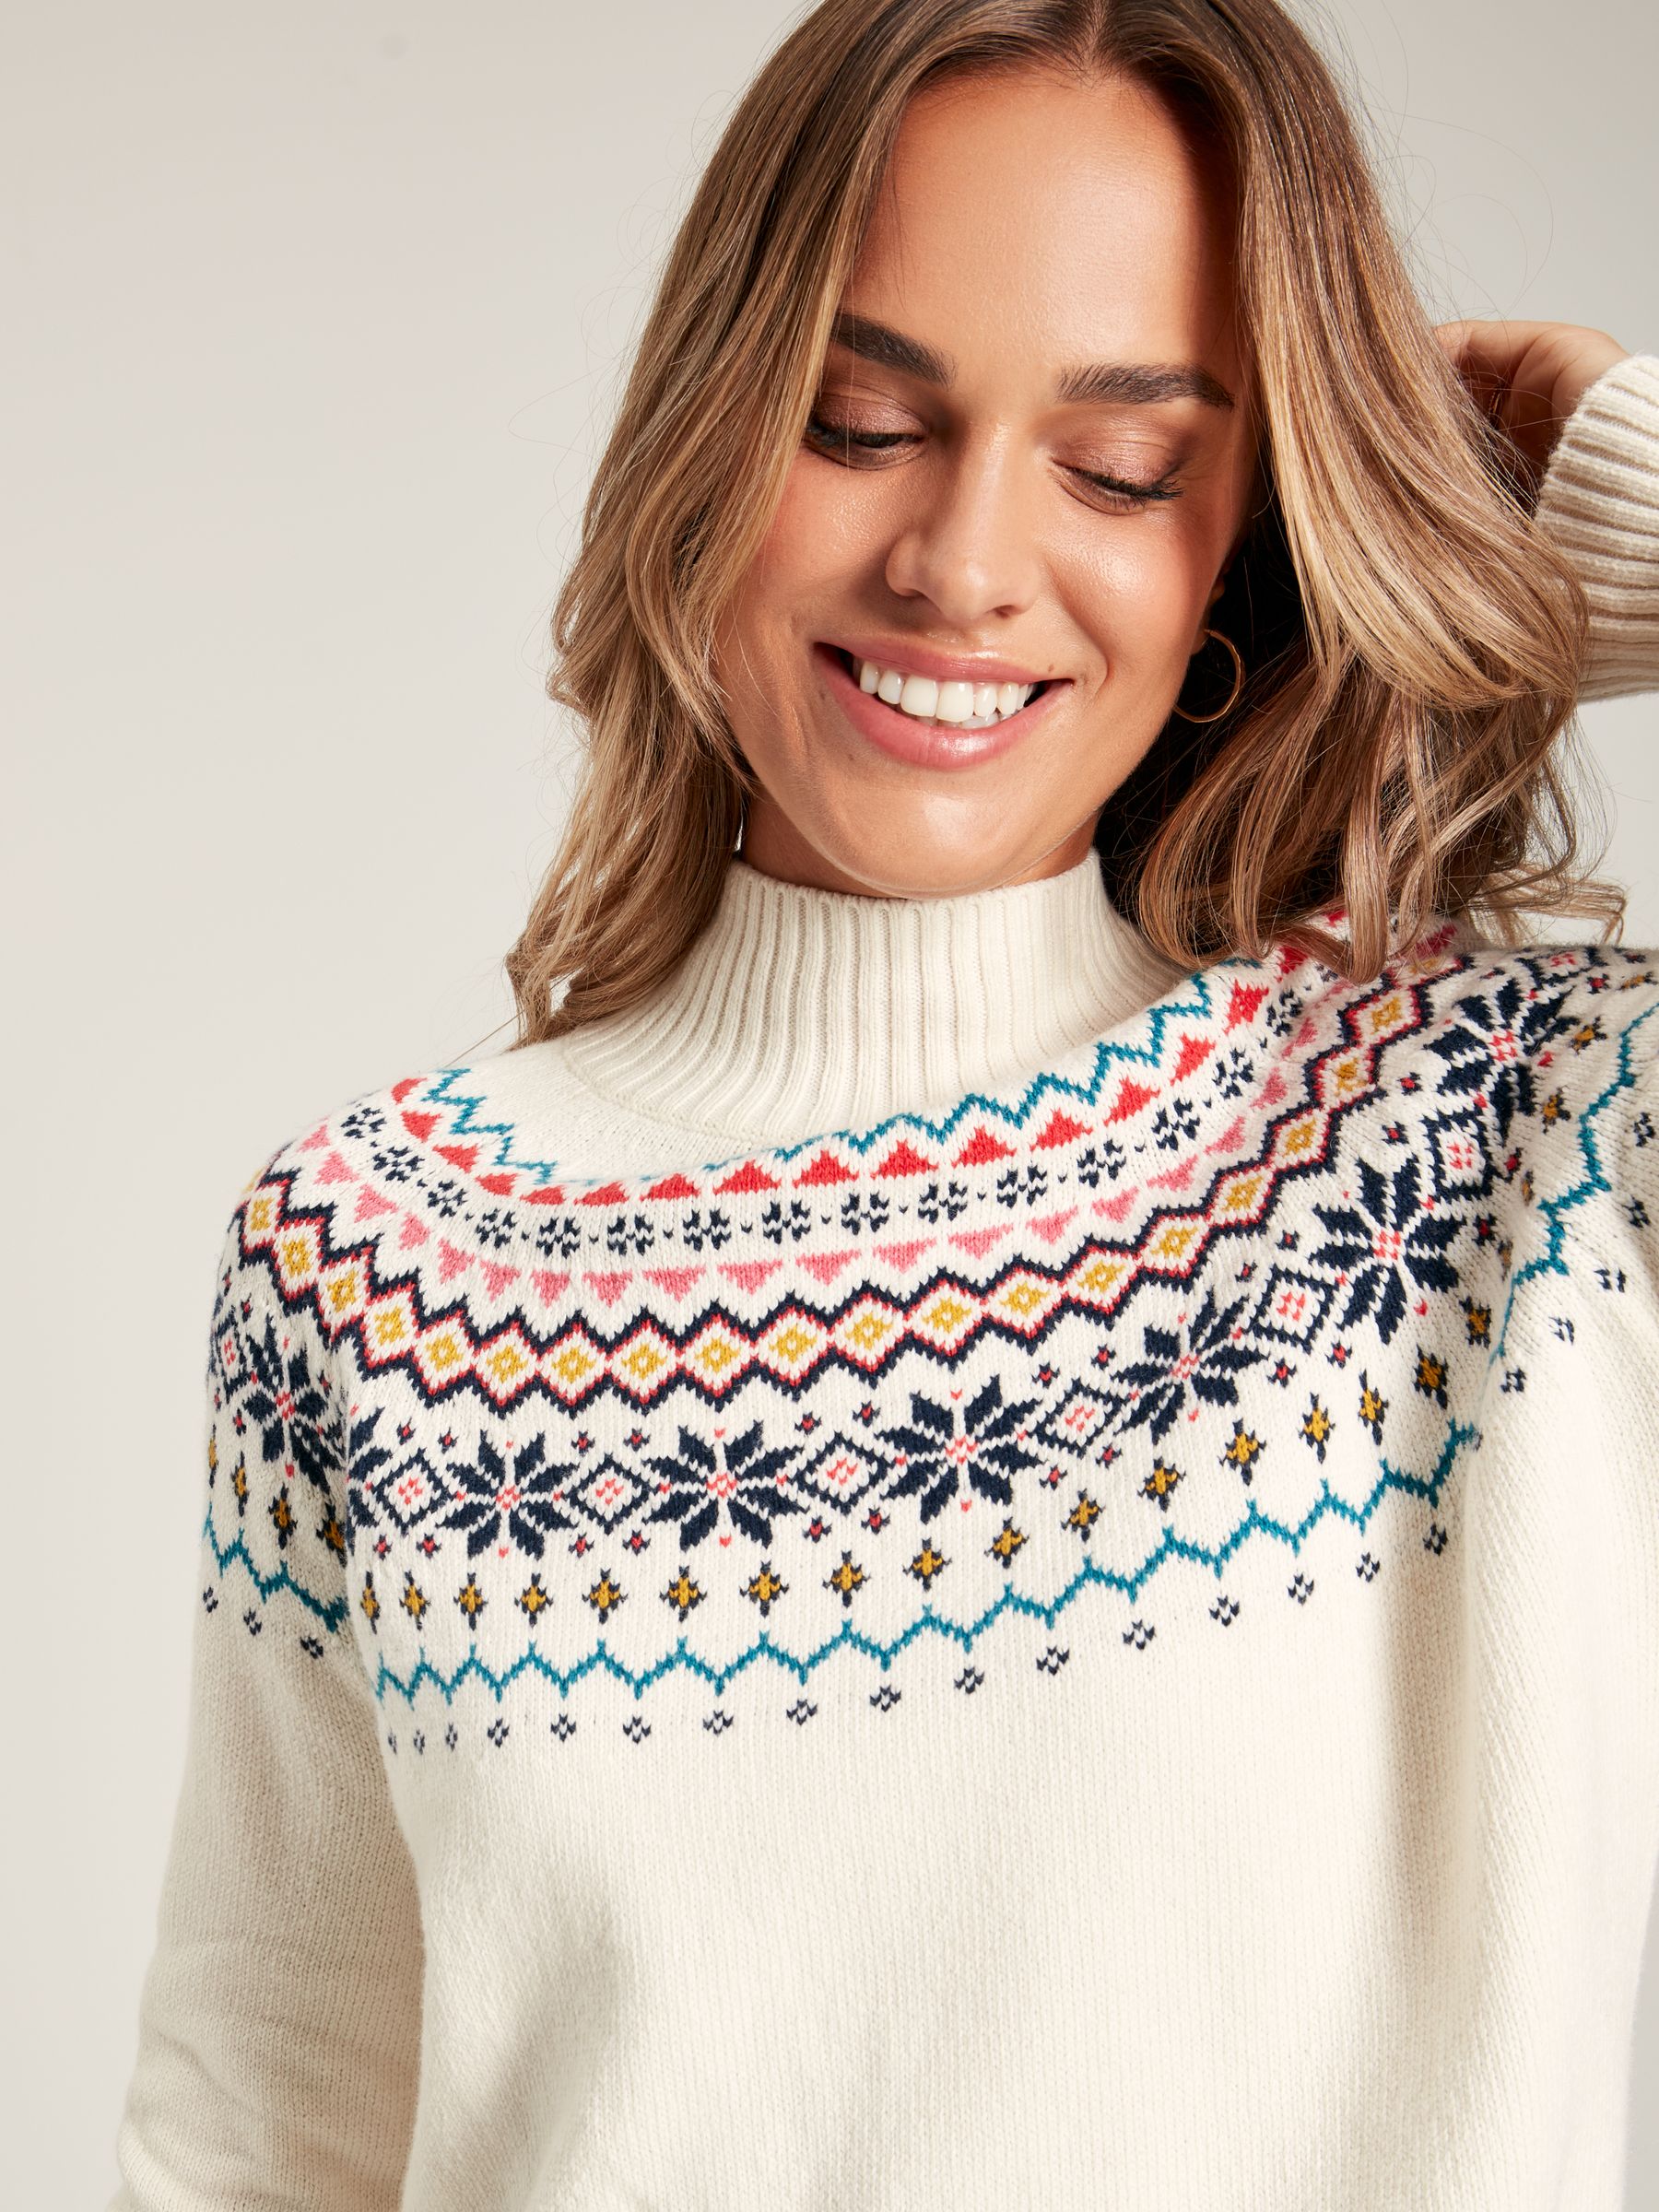 Buy Joules Alba Fair Isle Jumper from the Joules online shop